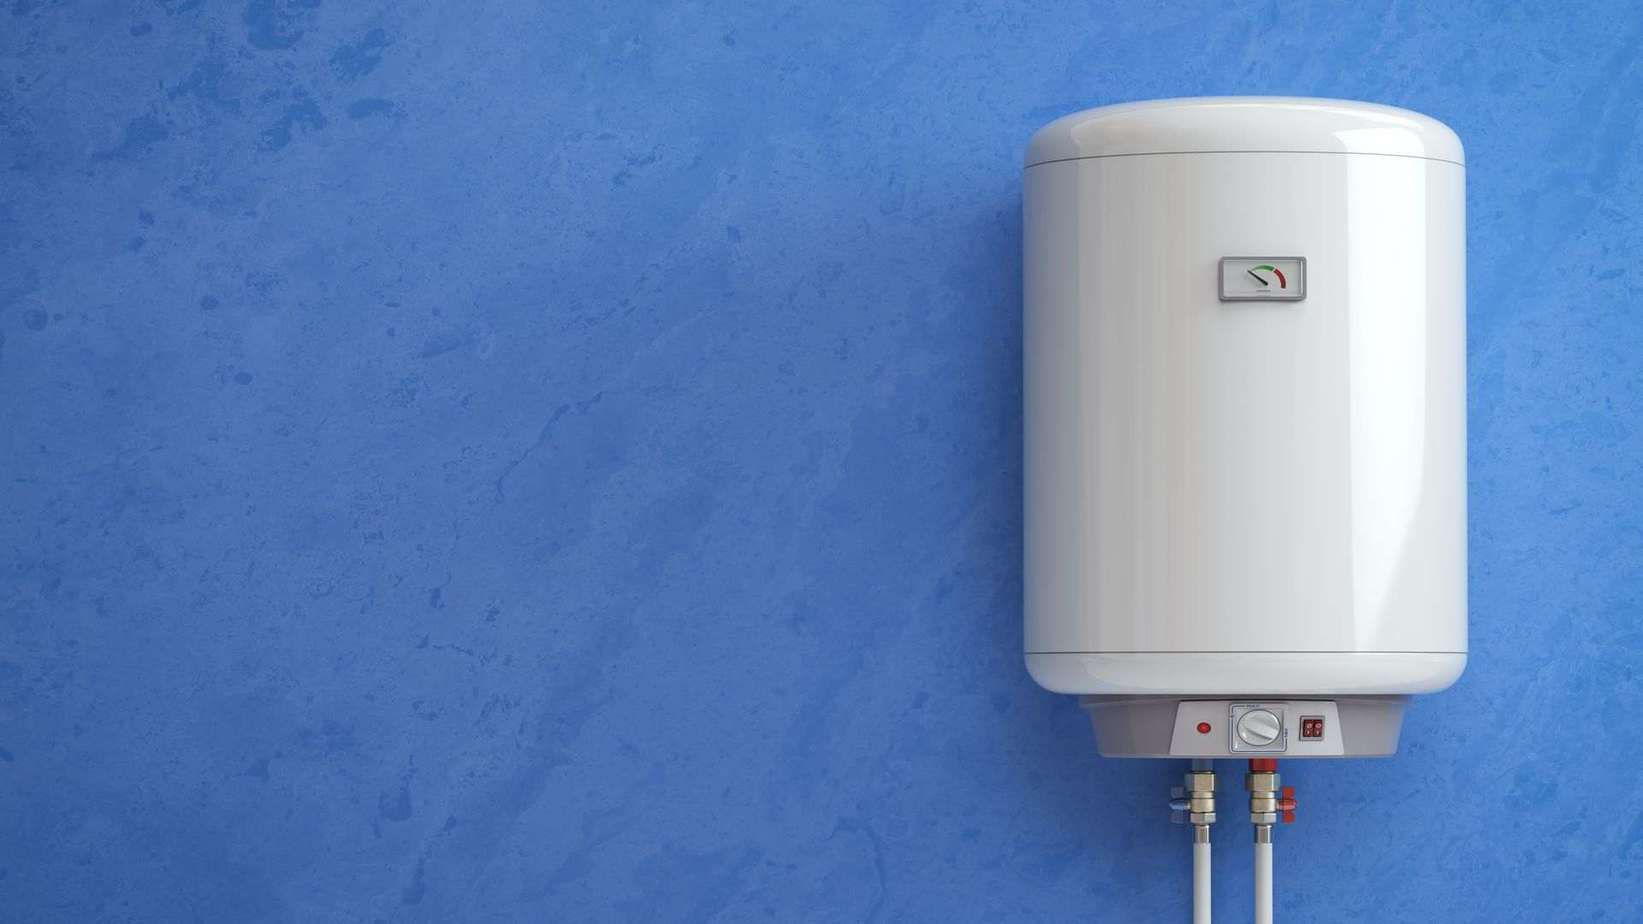 What are the Different Kinds Of Water Heaters Available On The Market?